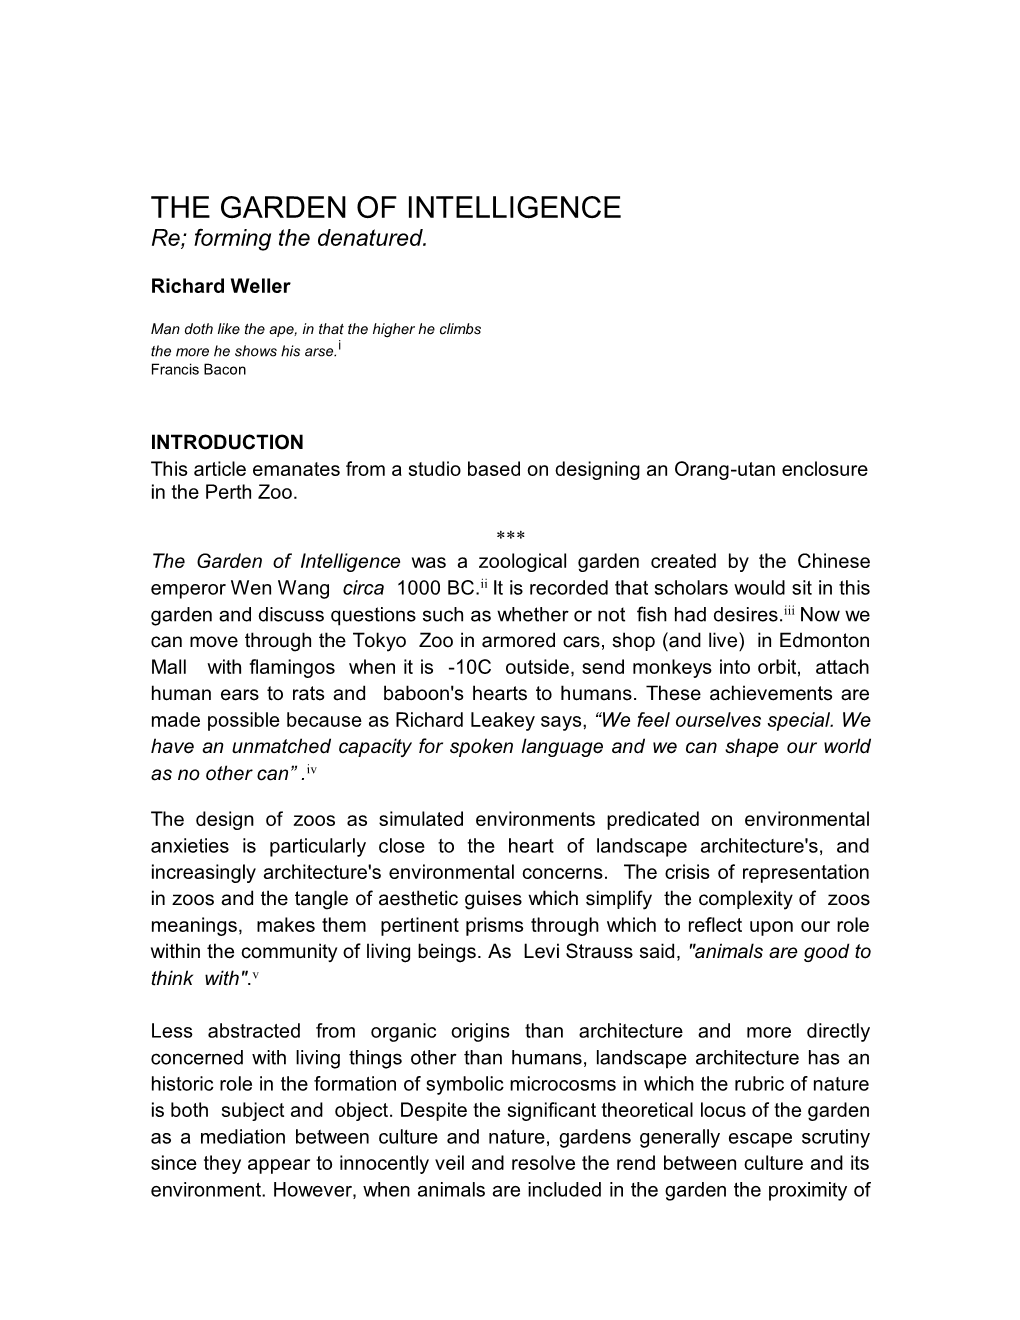 THE GARDEN of INTELLIGENCE Re; Forming the Denatured